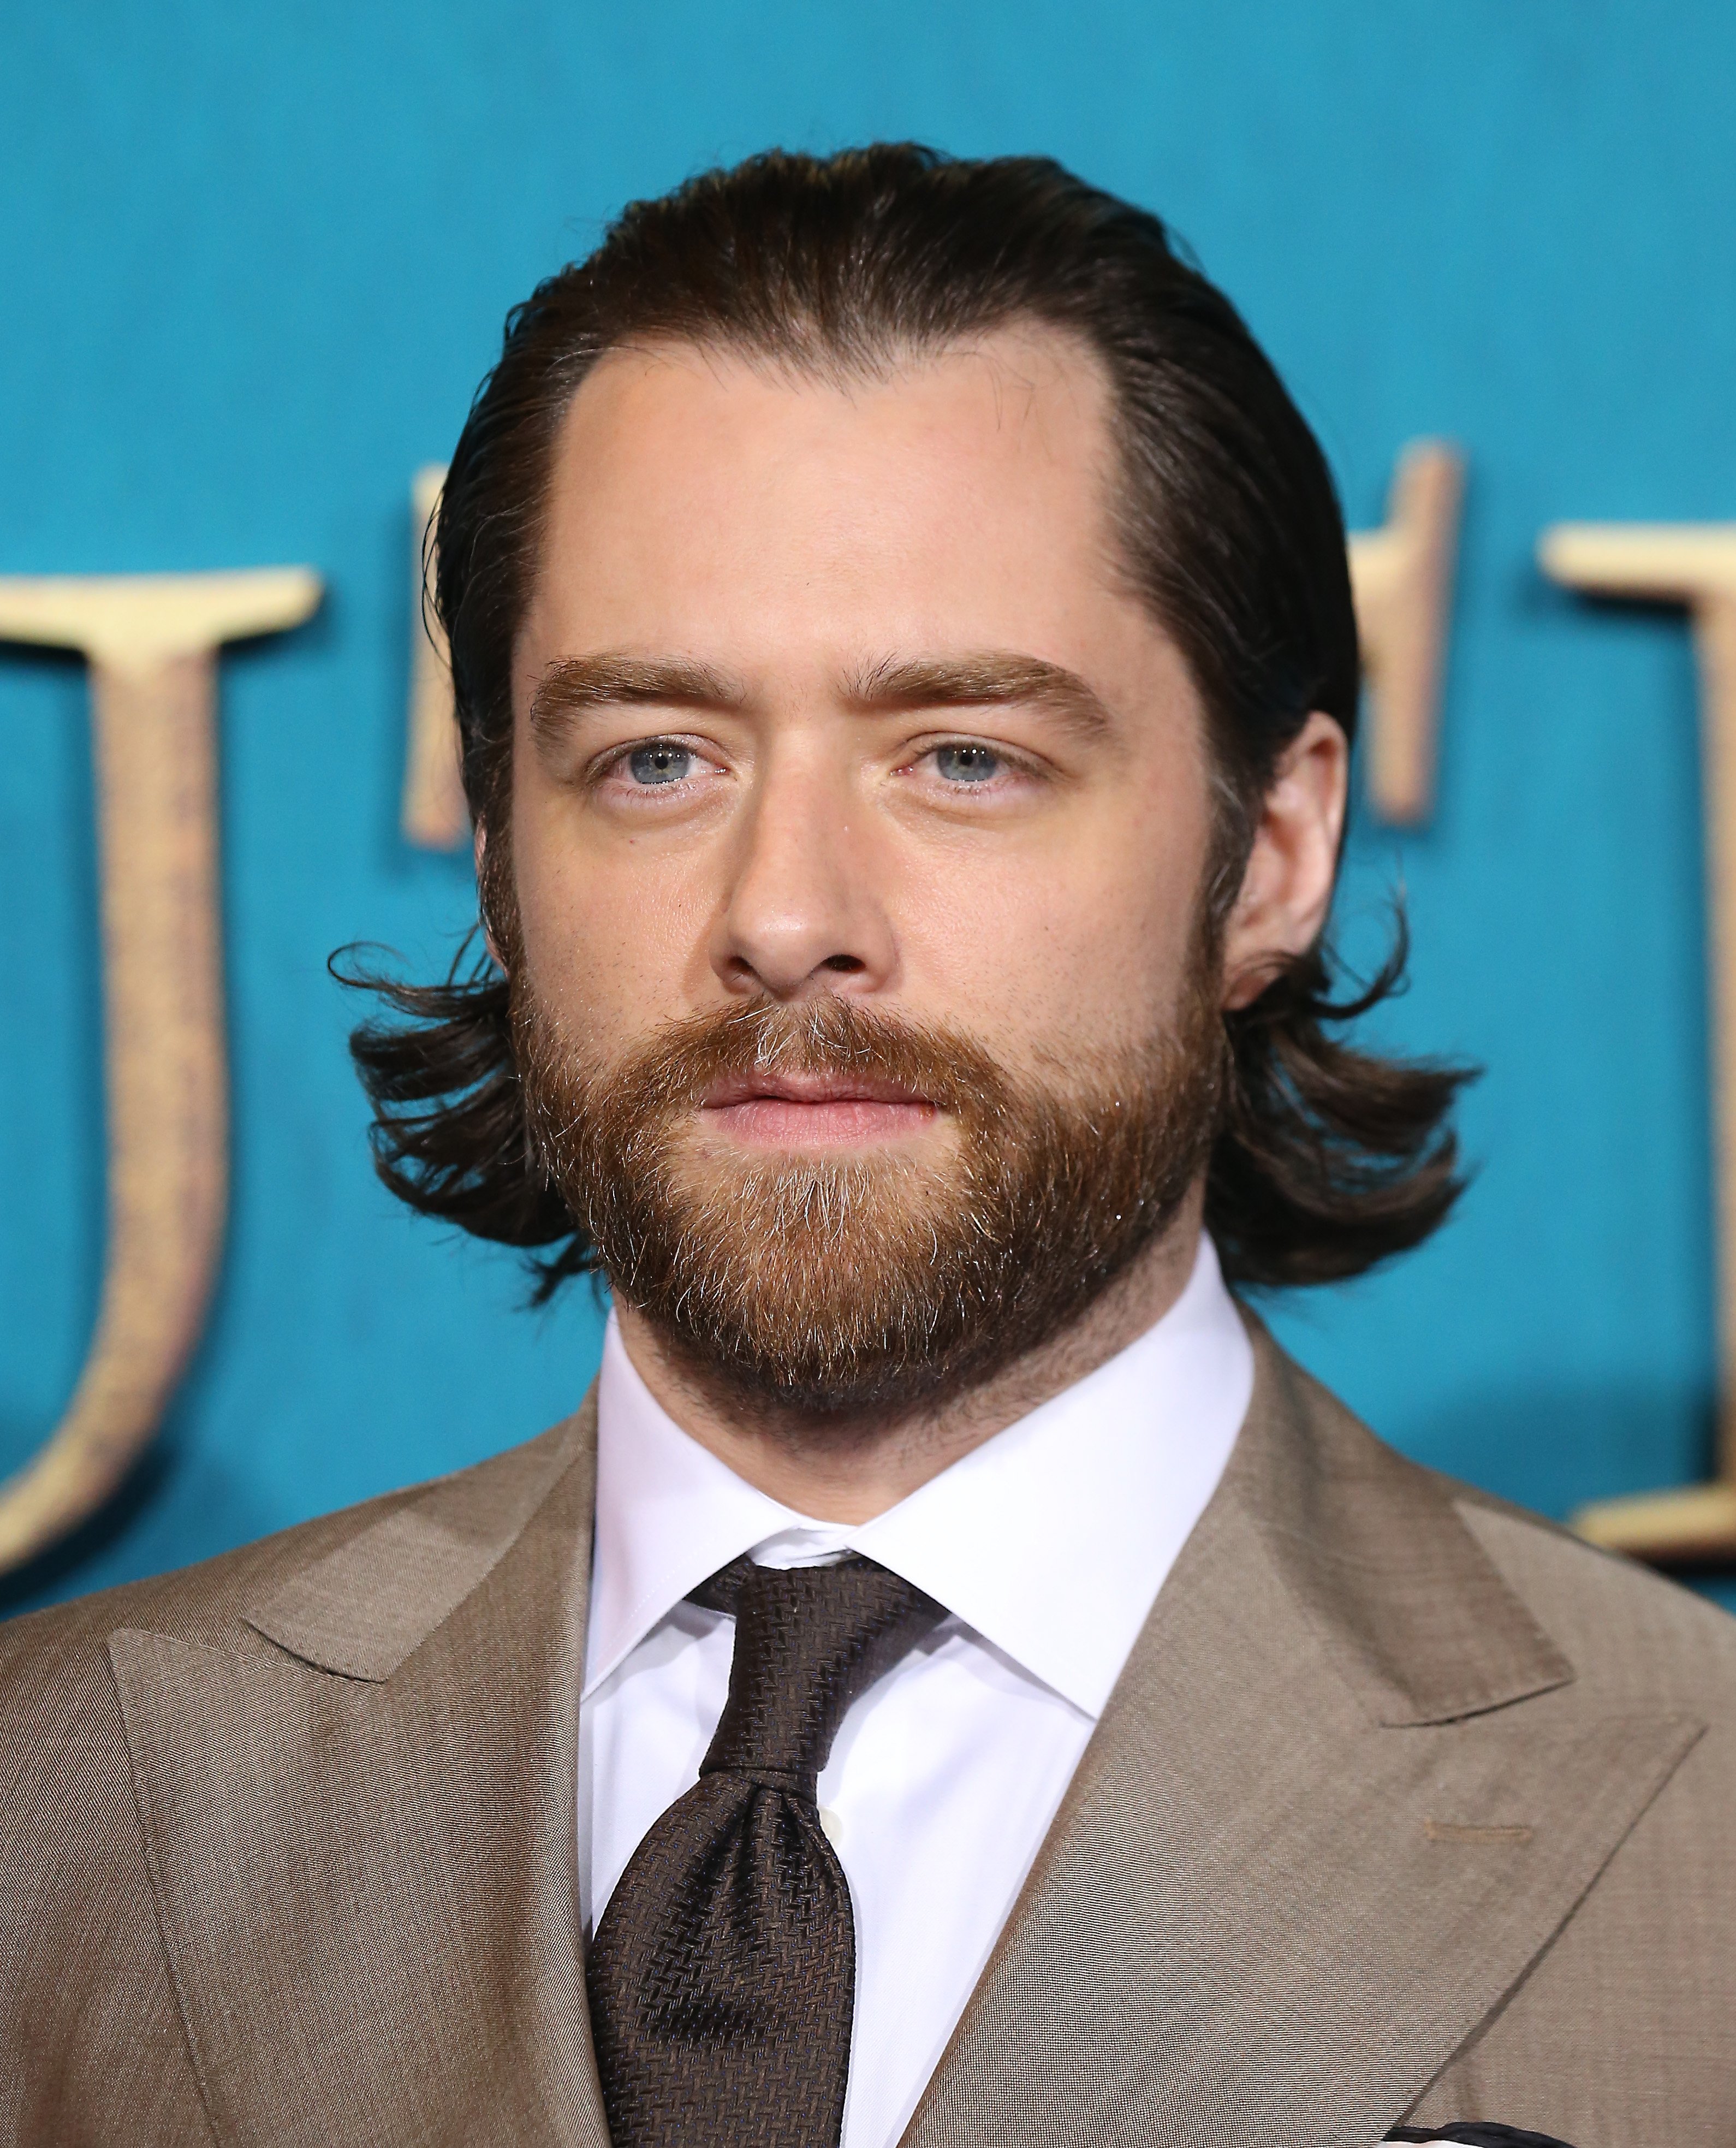 Richard Rankin attends the Starz Los Angeles premiere "Foreigner" Season 5 held at the Hollywood Palladium in Los Angeles, CA on February 13, 2020 |  Source: Getty Images